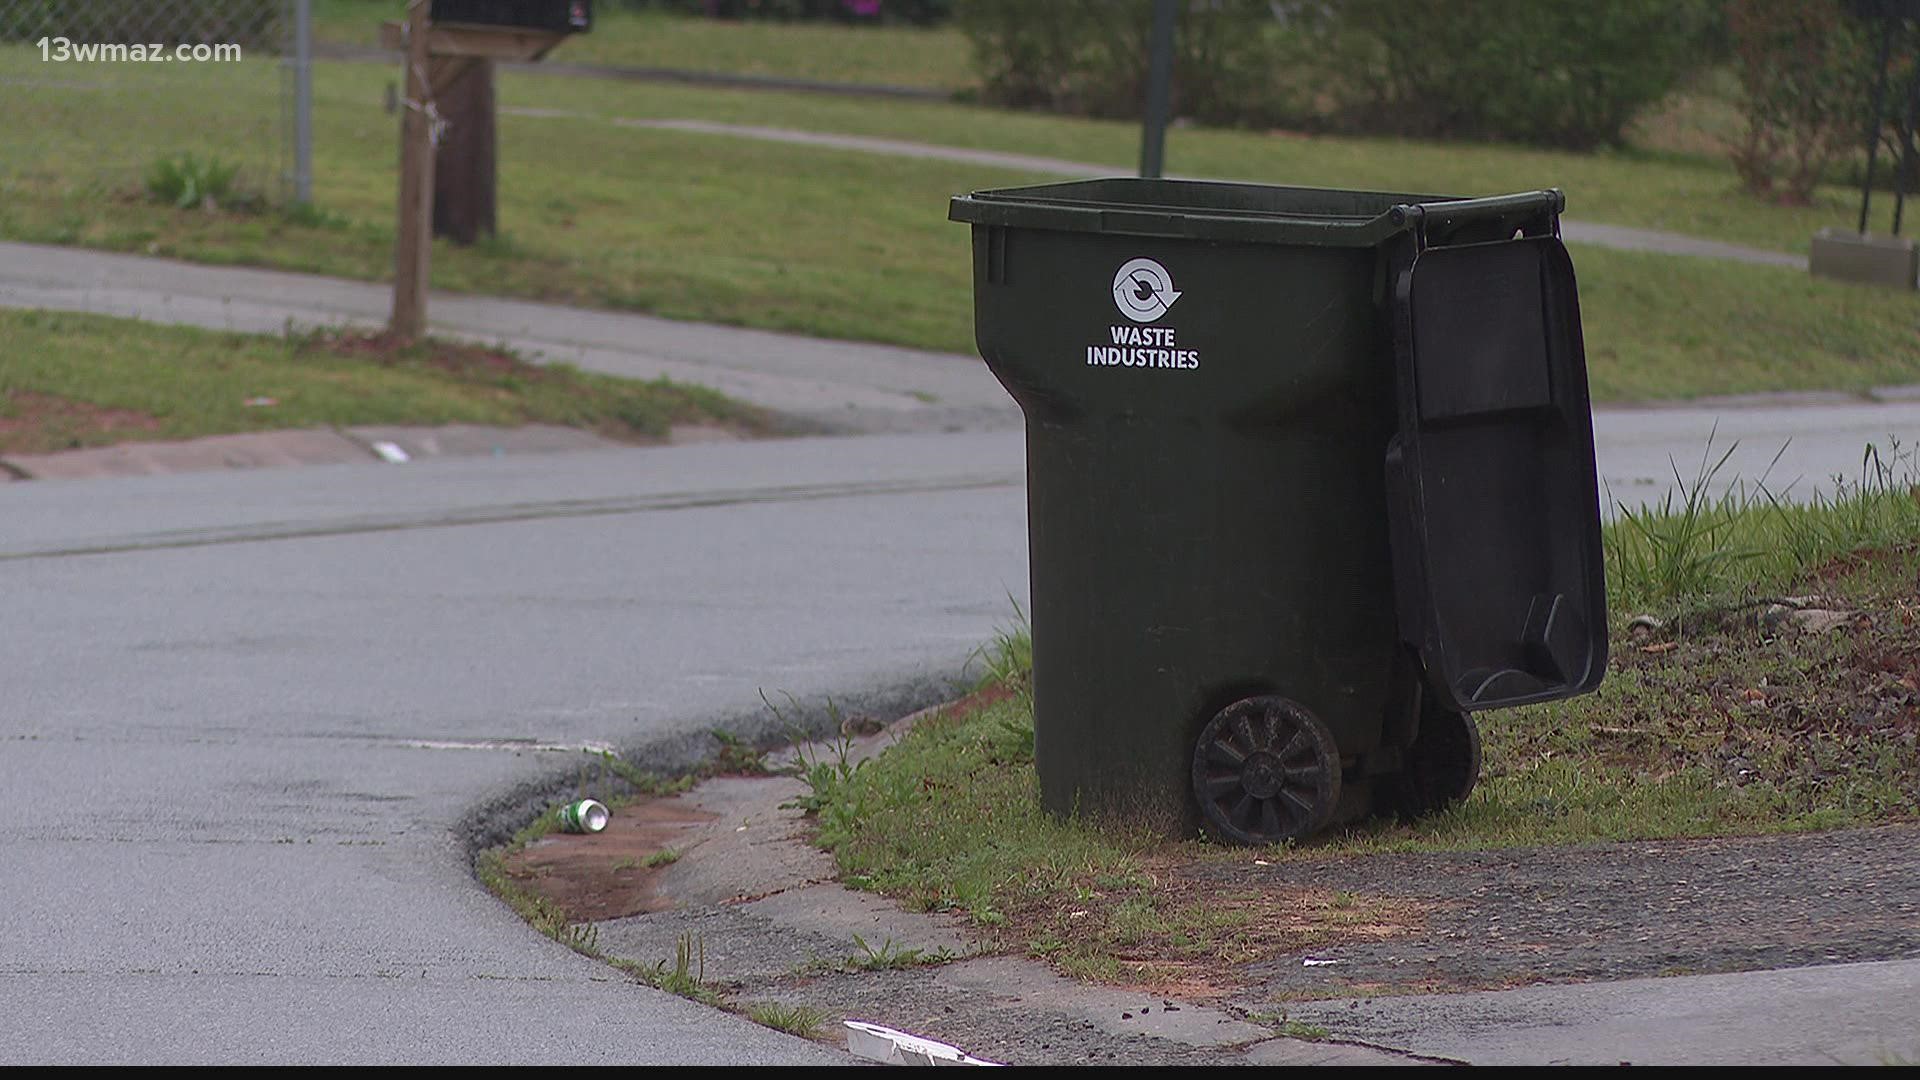 Warner Robins' sanitation account is more than $1 million in the red.